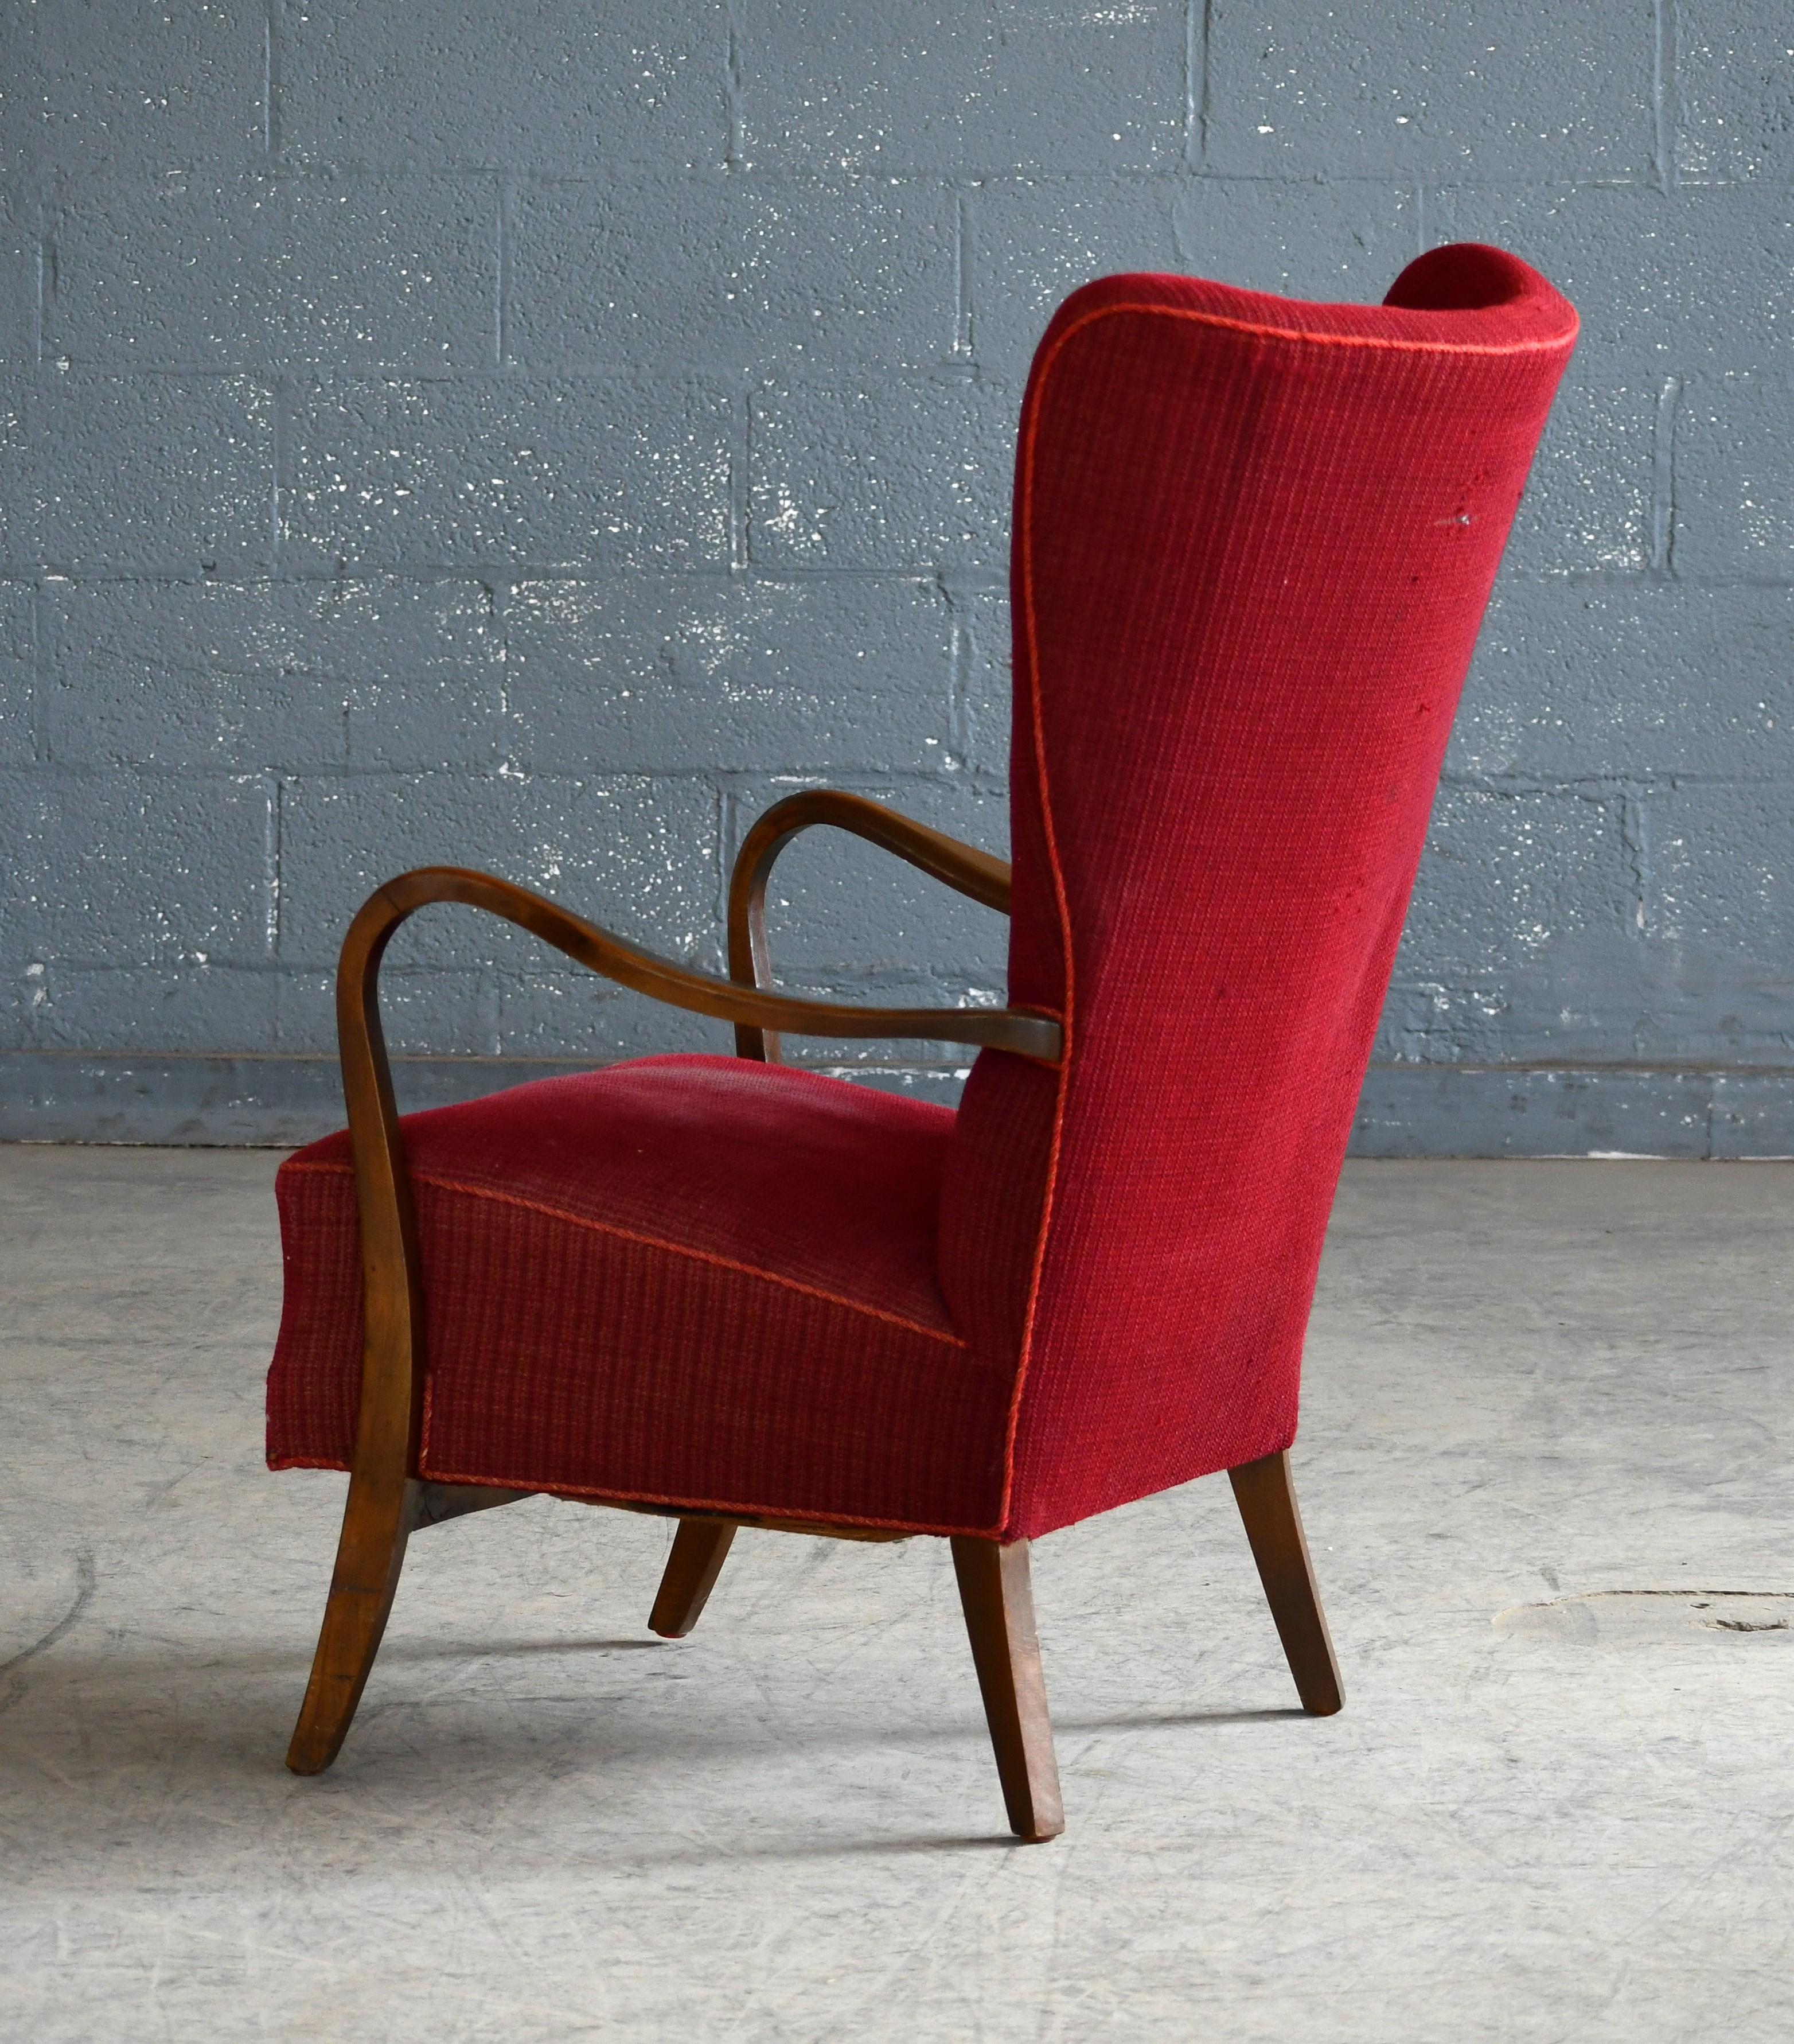 Mid-20th Century Danish Highback Easy Chair with Open Armrests by Alfred Christensen, 1940's For Sale